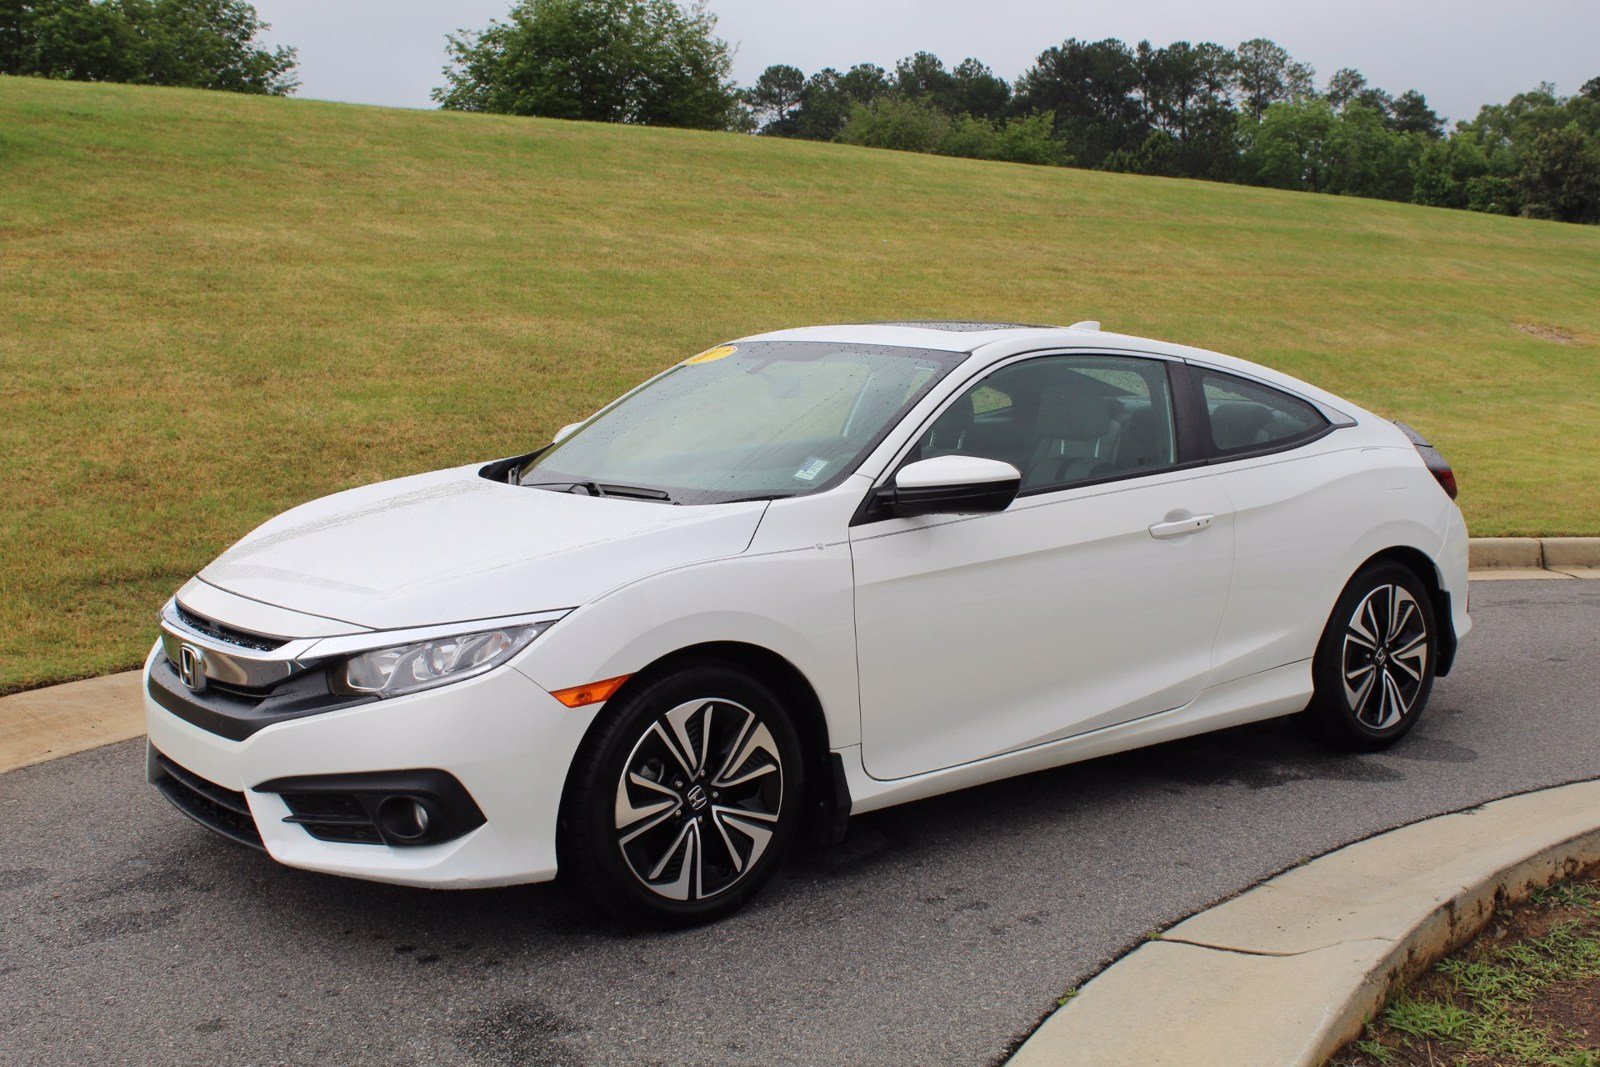 Pre-Owned 2017 Honda Civic Coupe EX-T 2dr Car in Macon #N3433 | Butler